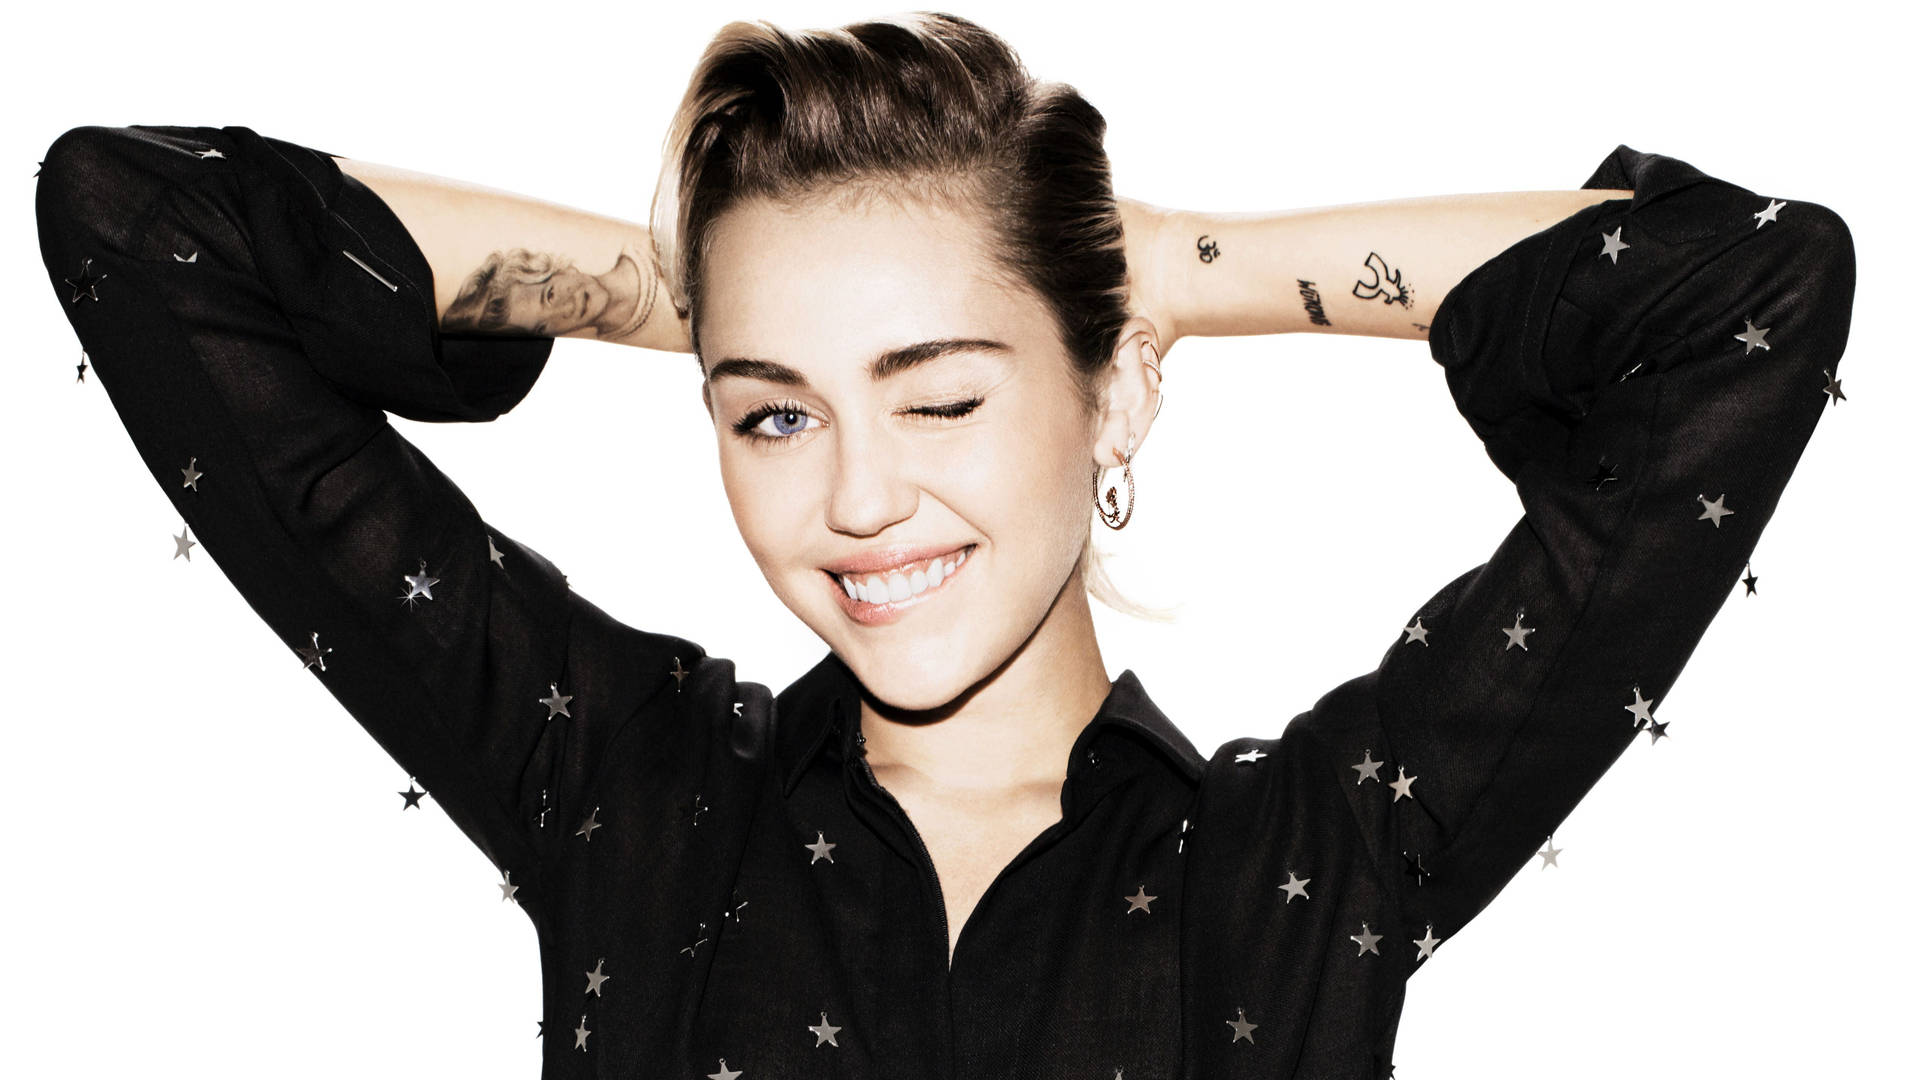 Miley Cyrus Carries On Wallpaper